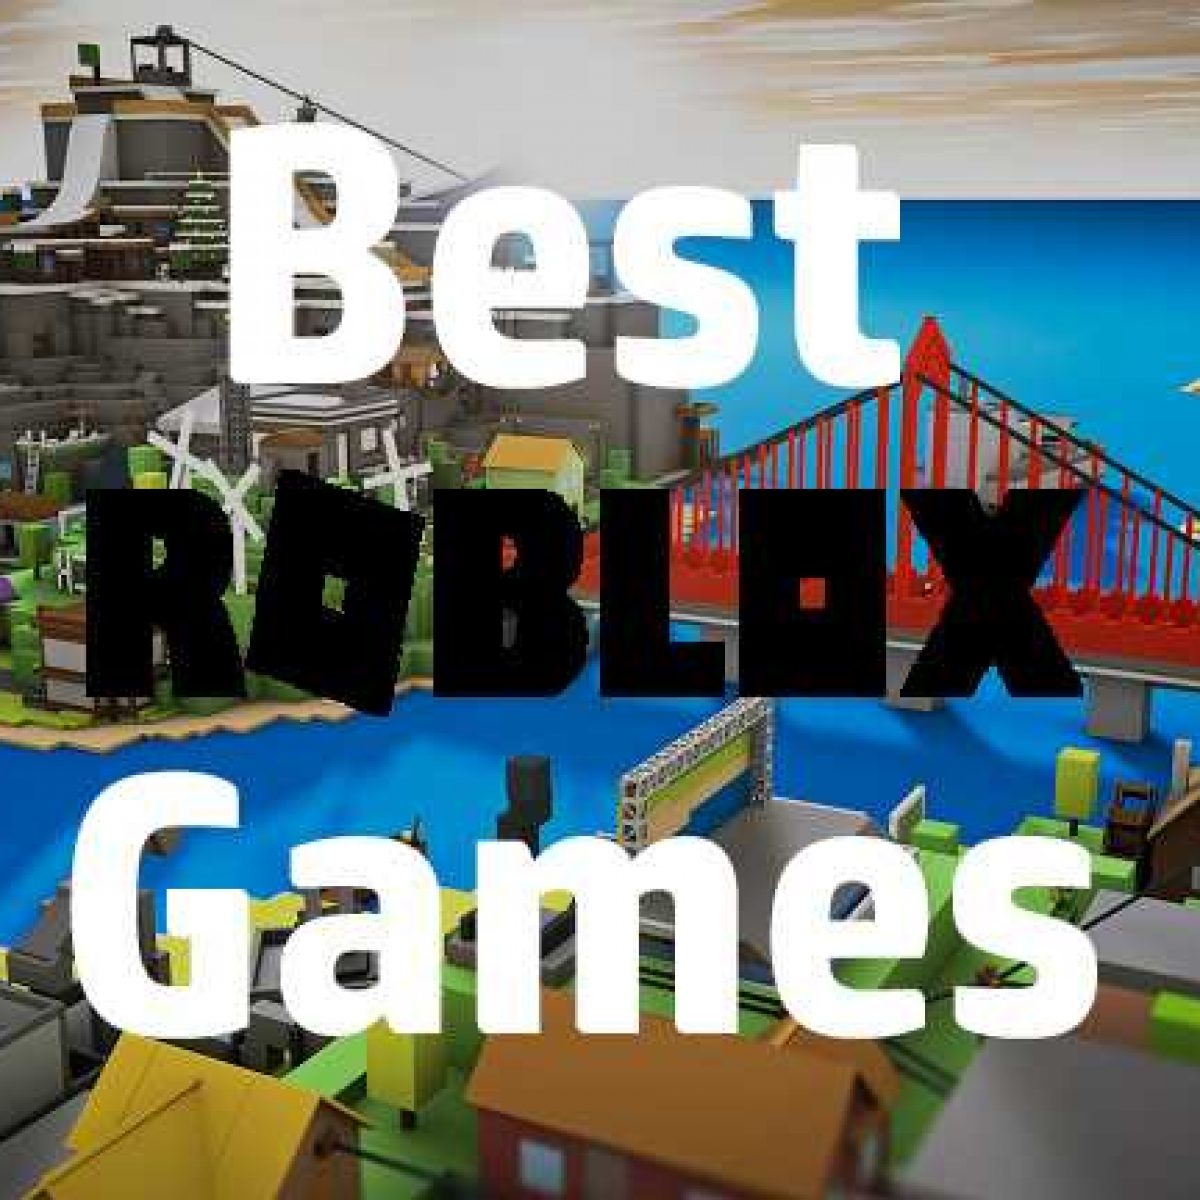 Roblox Assassin Codes 2019 List March Roblox The Free - codes for assassin roblox 2019 december